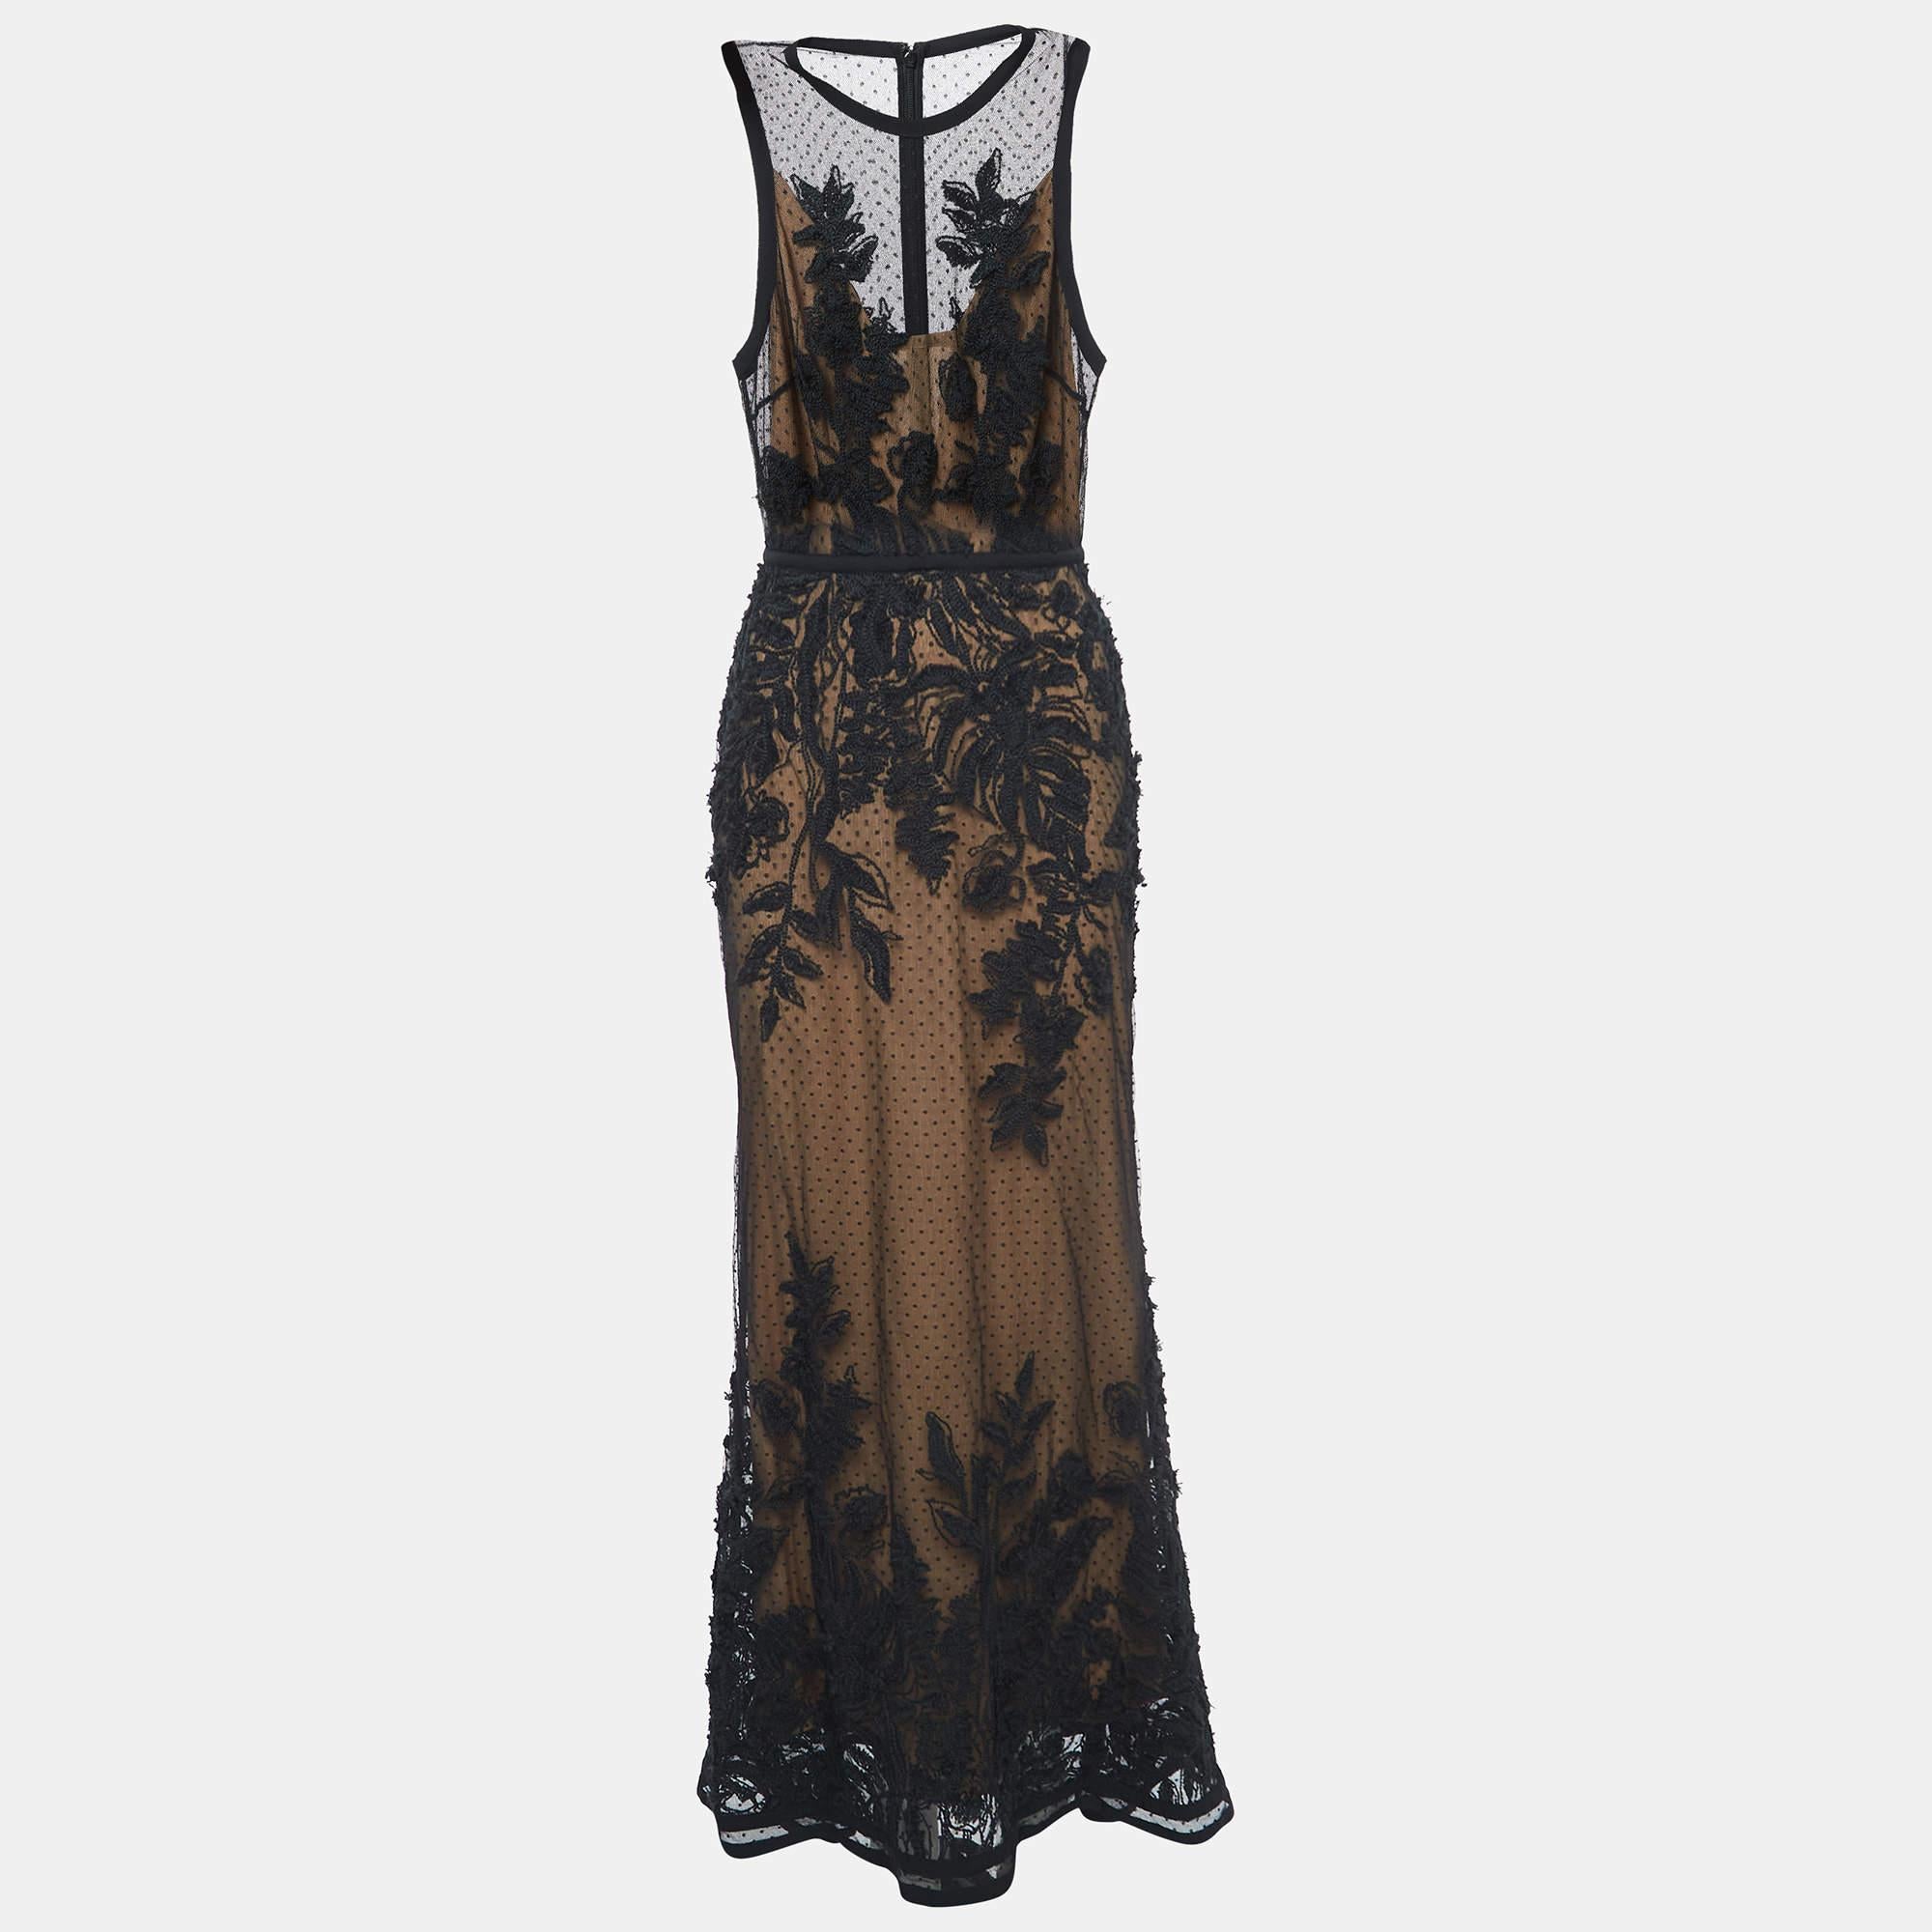 Resplendent, elegant, and gorgeous, this gown defines it all. Flaunting a floor-length silhouette, this gown is beautified using stunning details and a stylish neckline. Wear it with statement accessories and a defining clutch.

